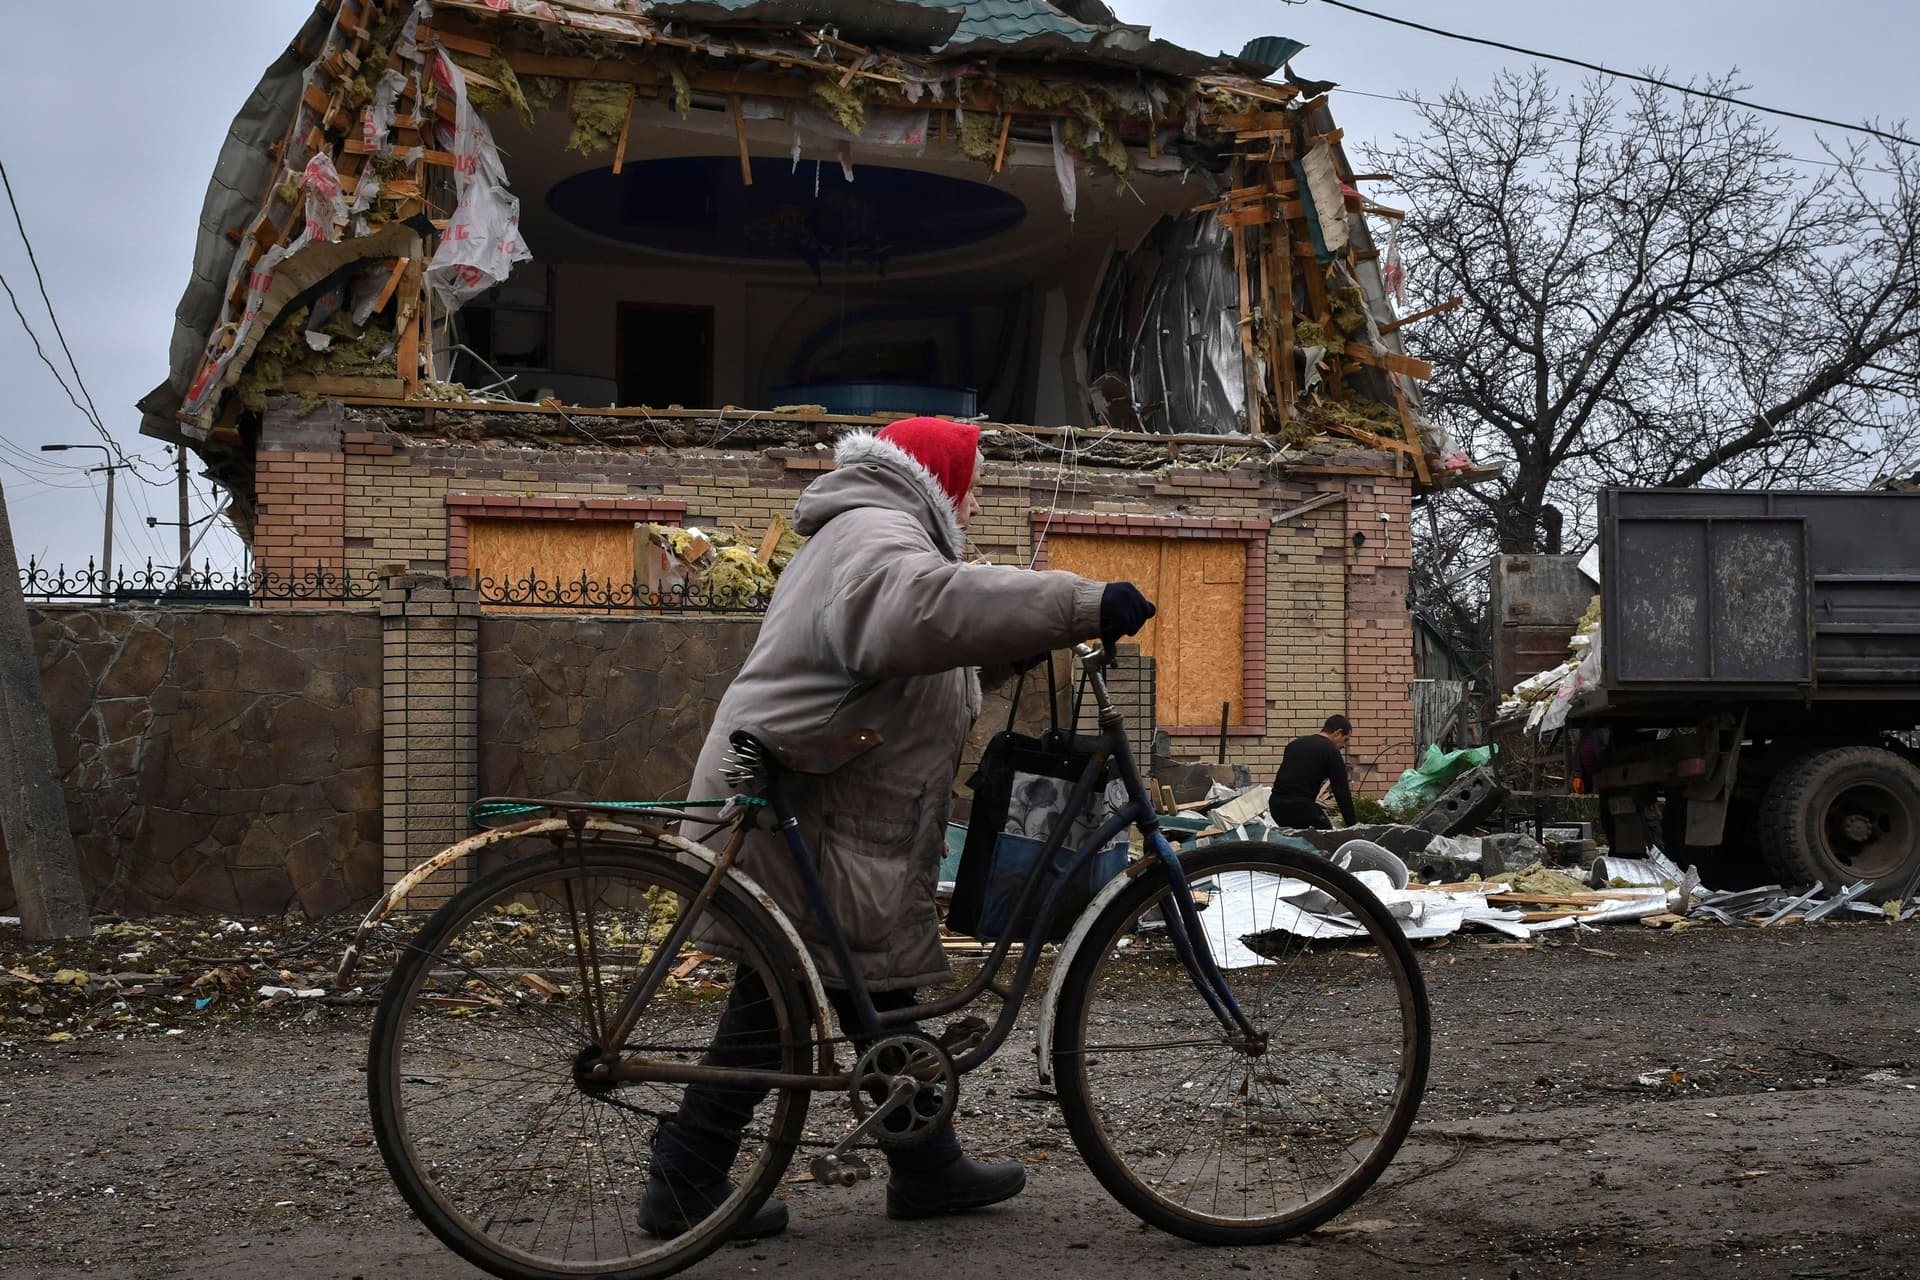 A woman passes with a bicycle as a local resident works to clean the debris from a damaged house after Russian shelling in Kramatorsk